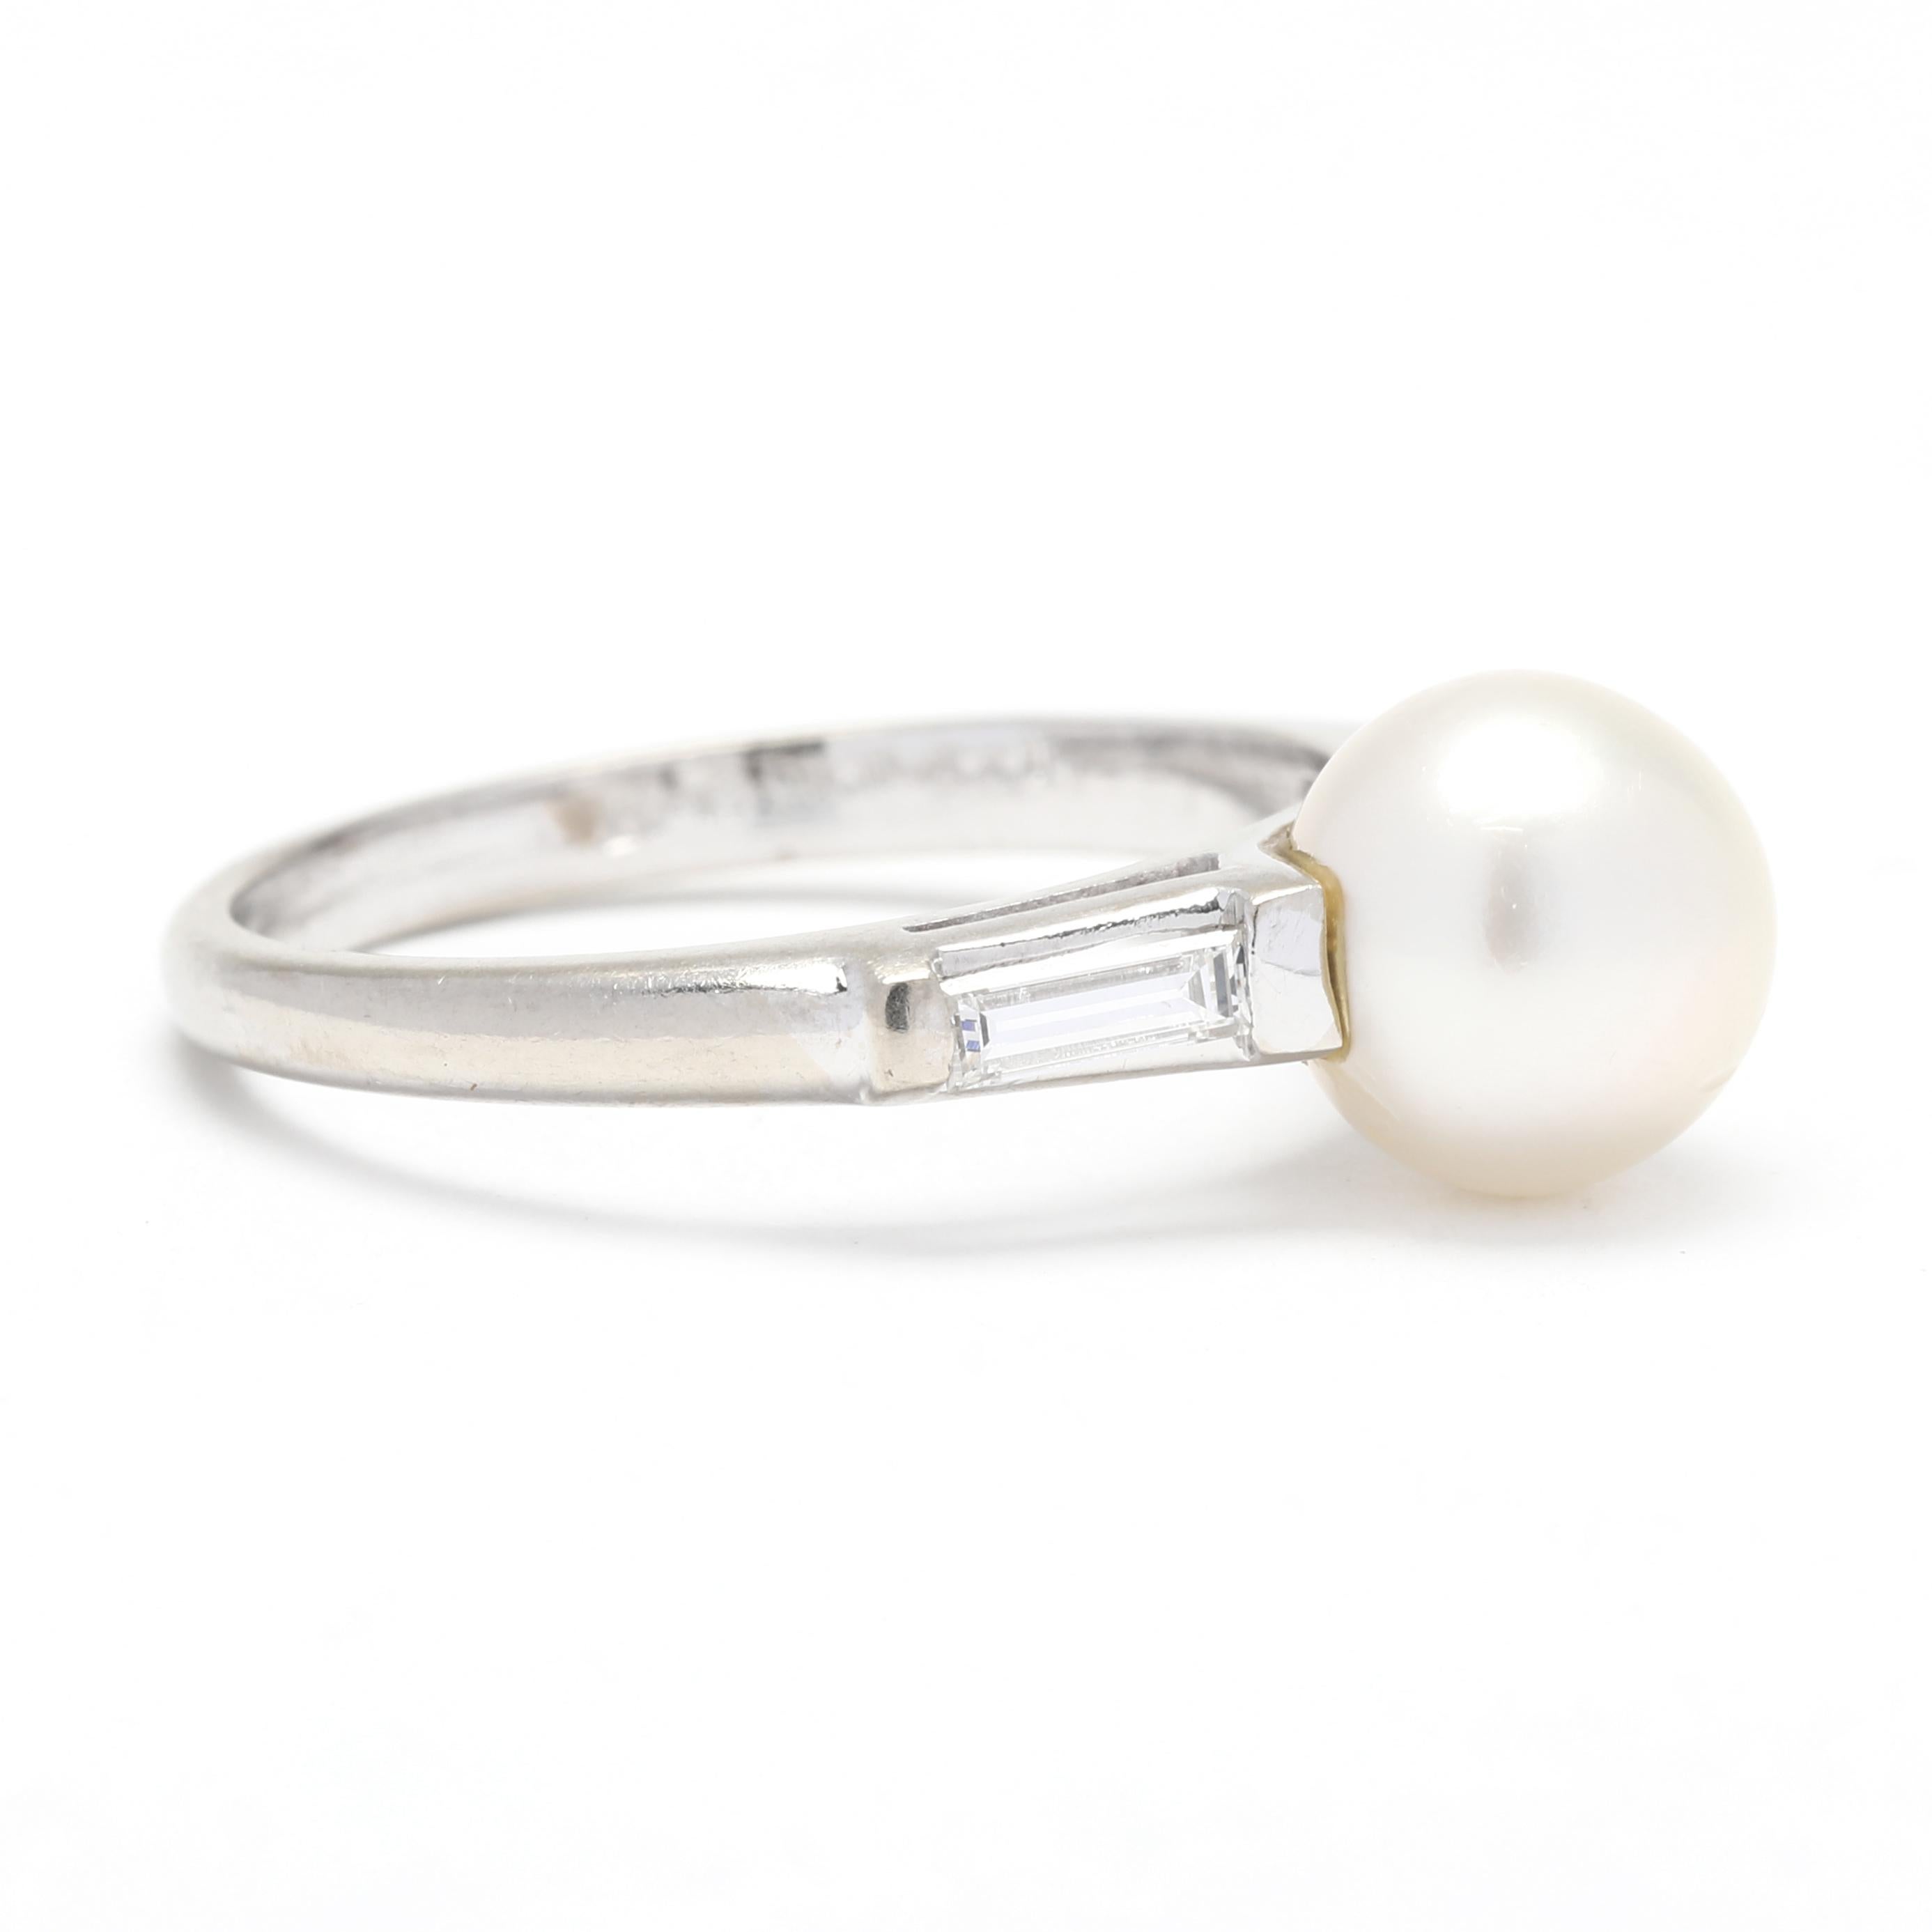 This elegant 0.30ctw pearl baguette diamond engagement ring is crafted in luxurious platinum. At the center of this solitaire ring lies a luminous pearl, surrounded by a shimmering baguette diamond halo. This beautiful pearl engagement ring is